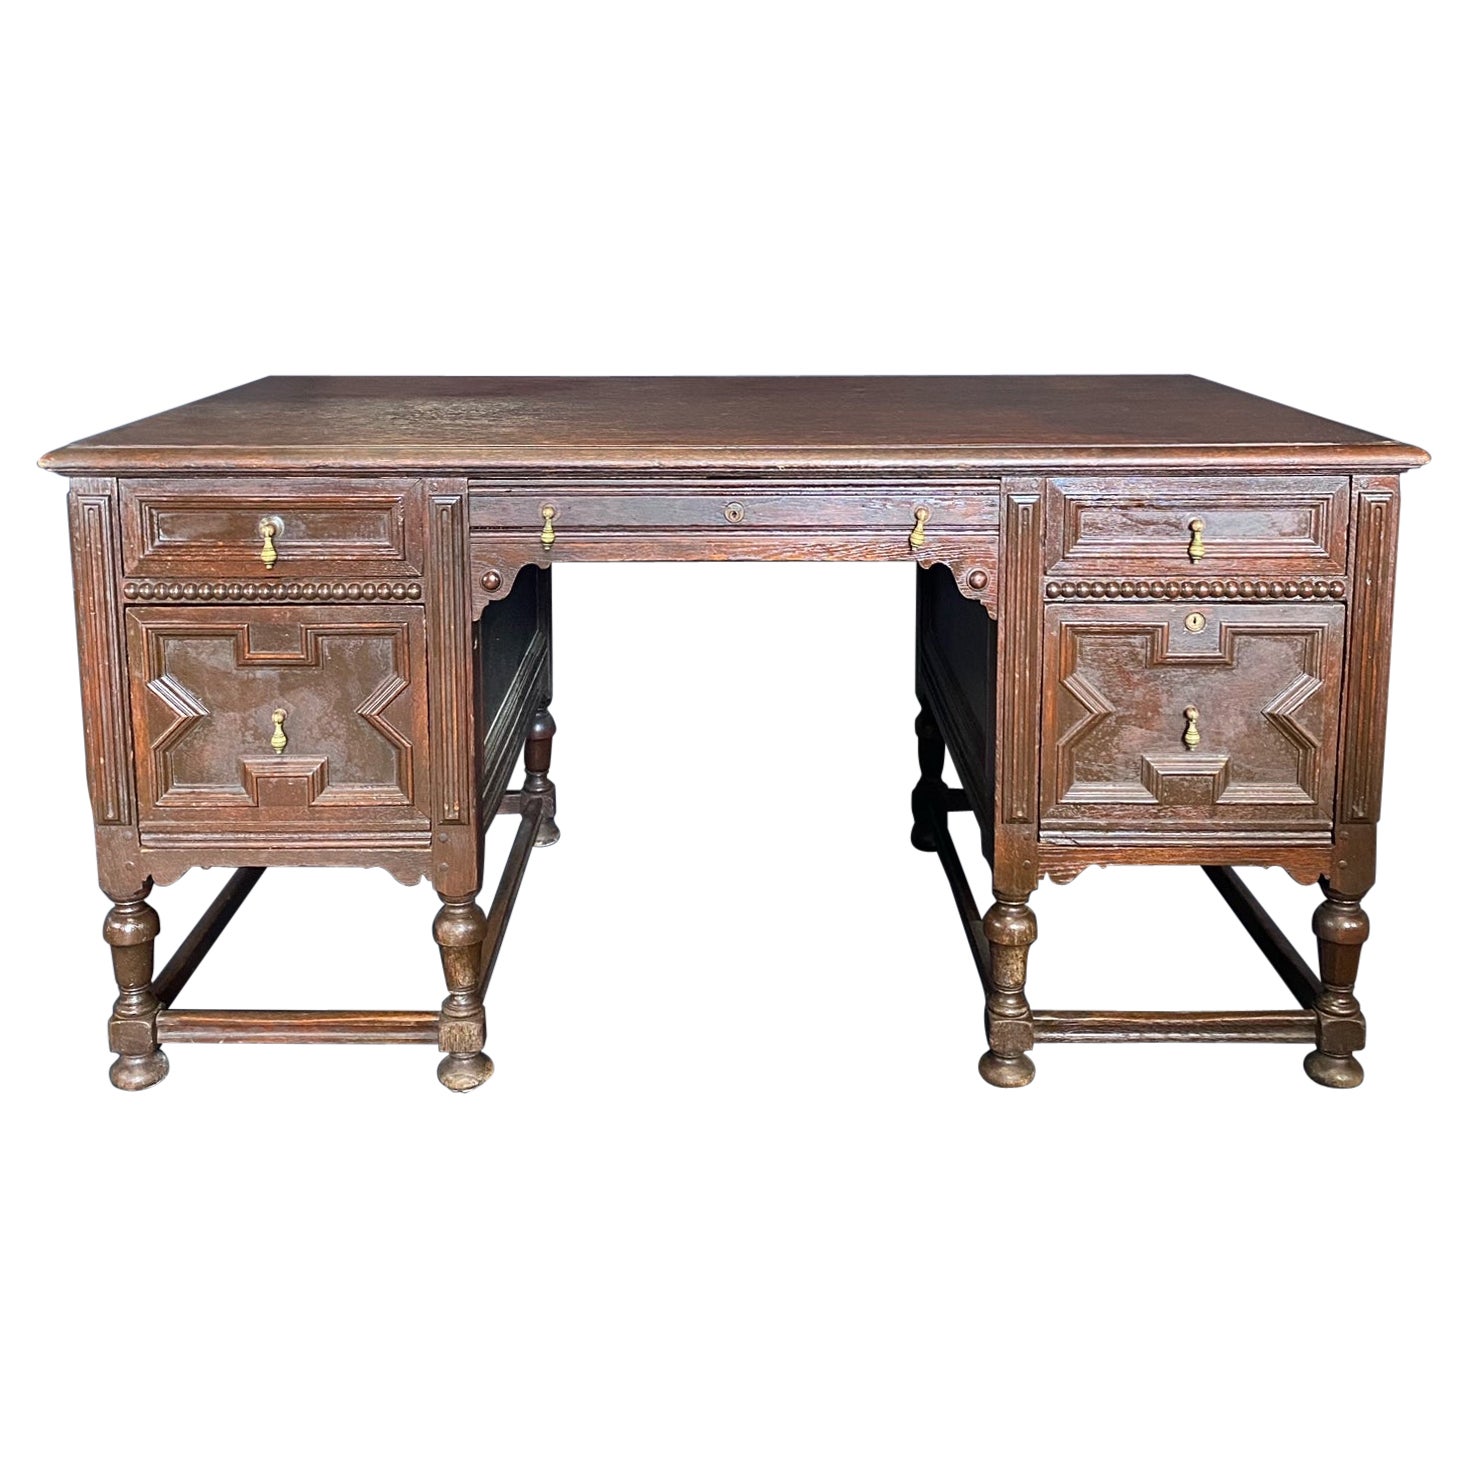 Stunning British Charles II Style Two Sided Writing Table or Desk